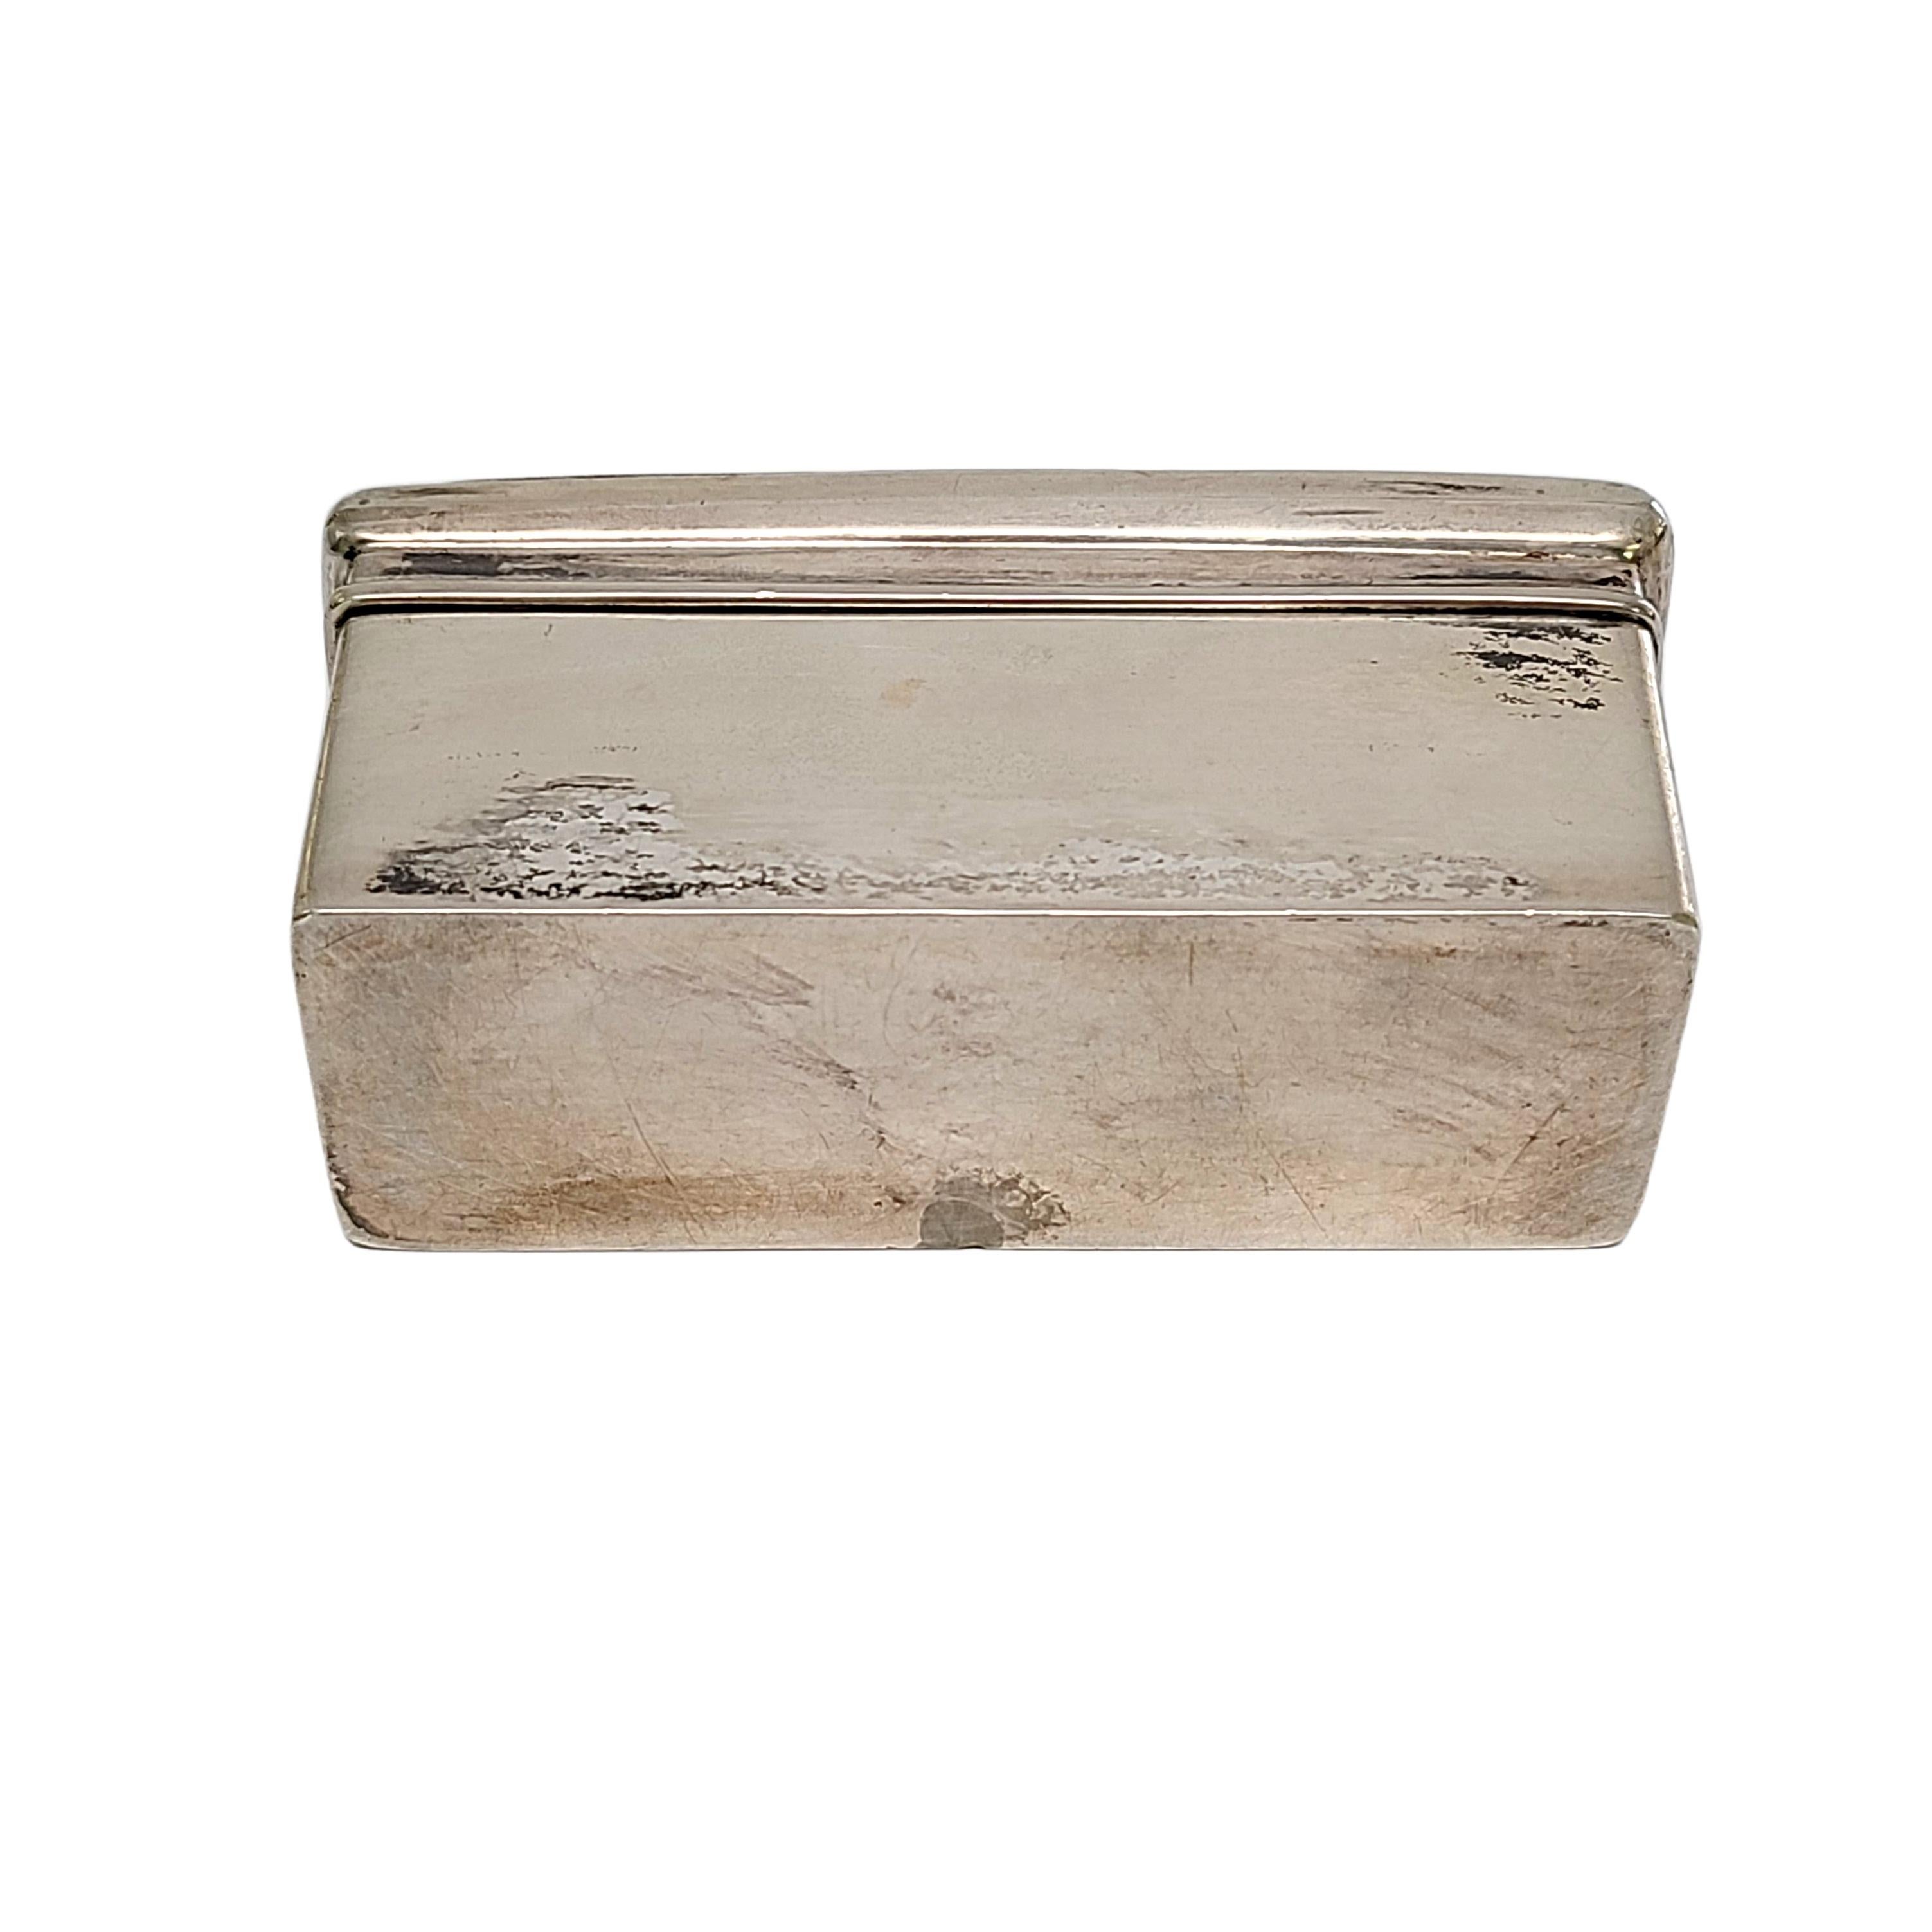 Women's or Men's Silver Rectangle Trinket Box with Engraving For Sale